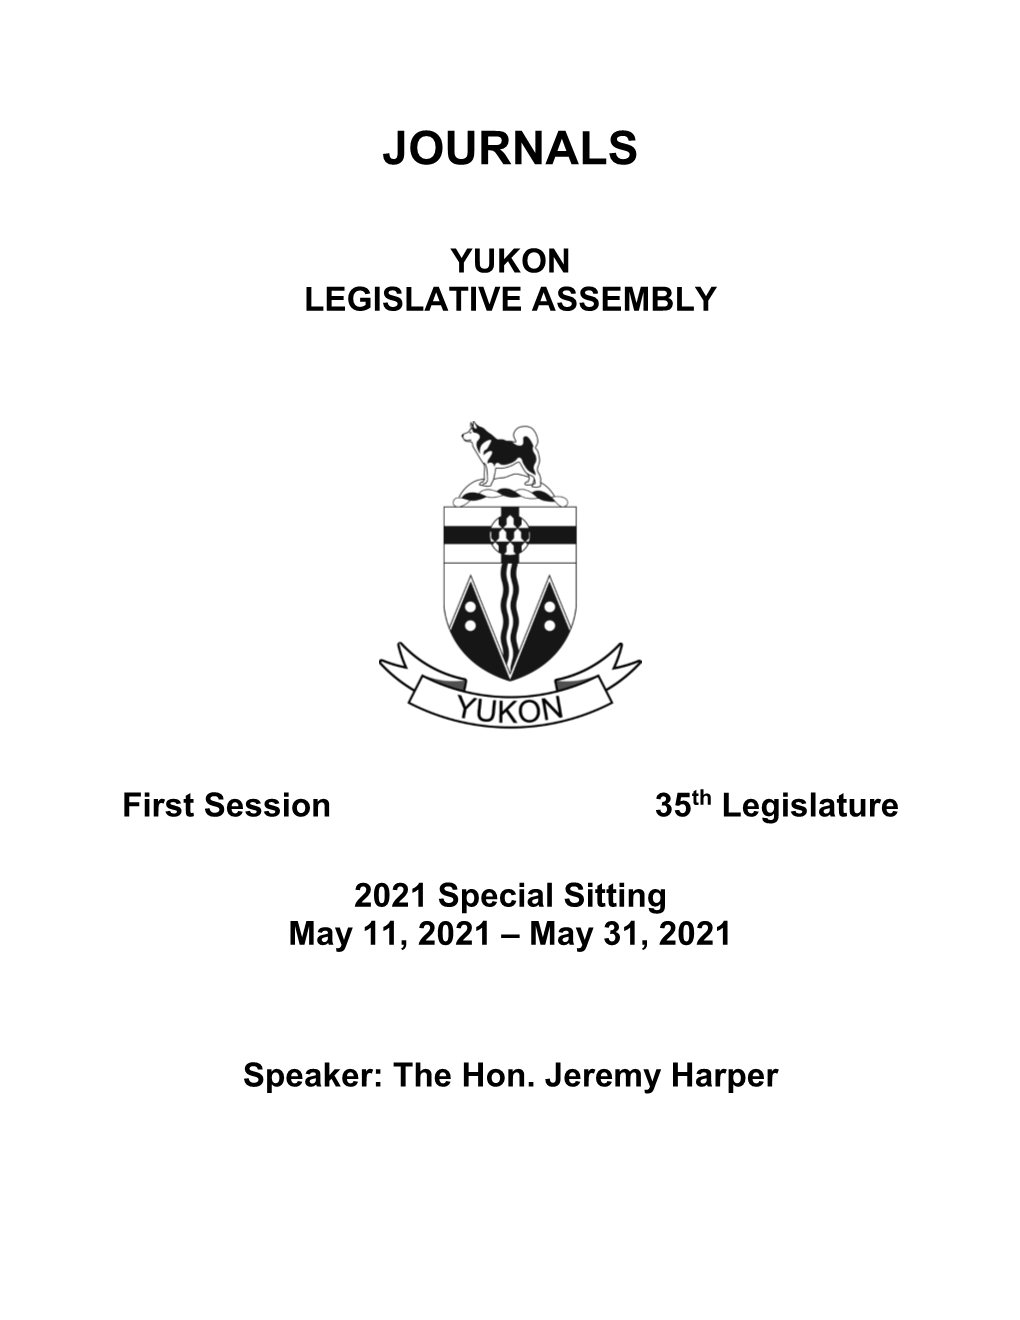 Journals of the Yukon Legislative Assembly 2021 Special Sitting